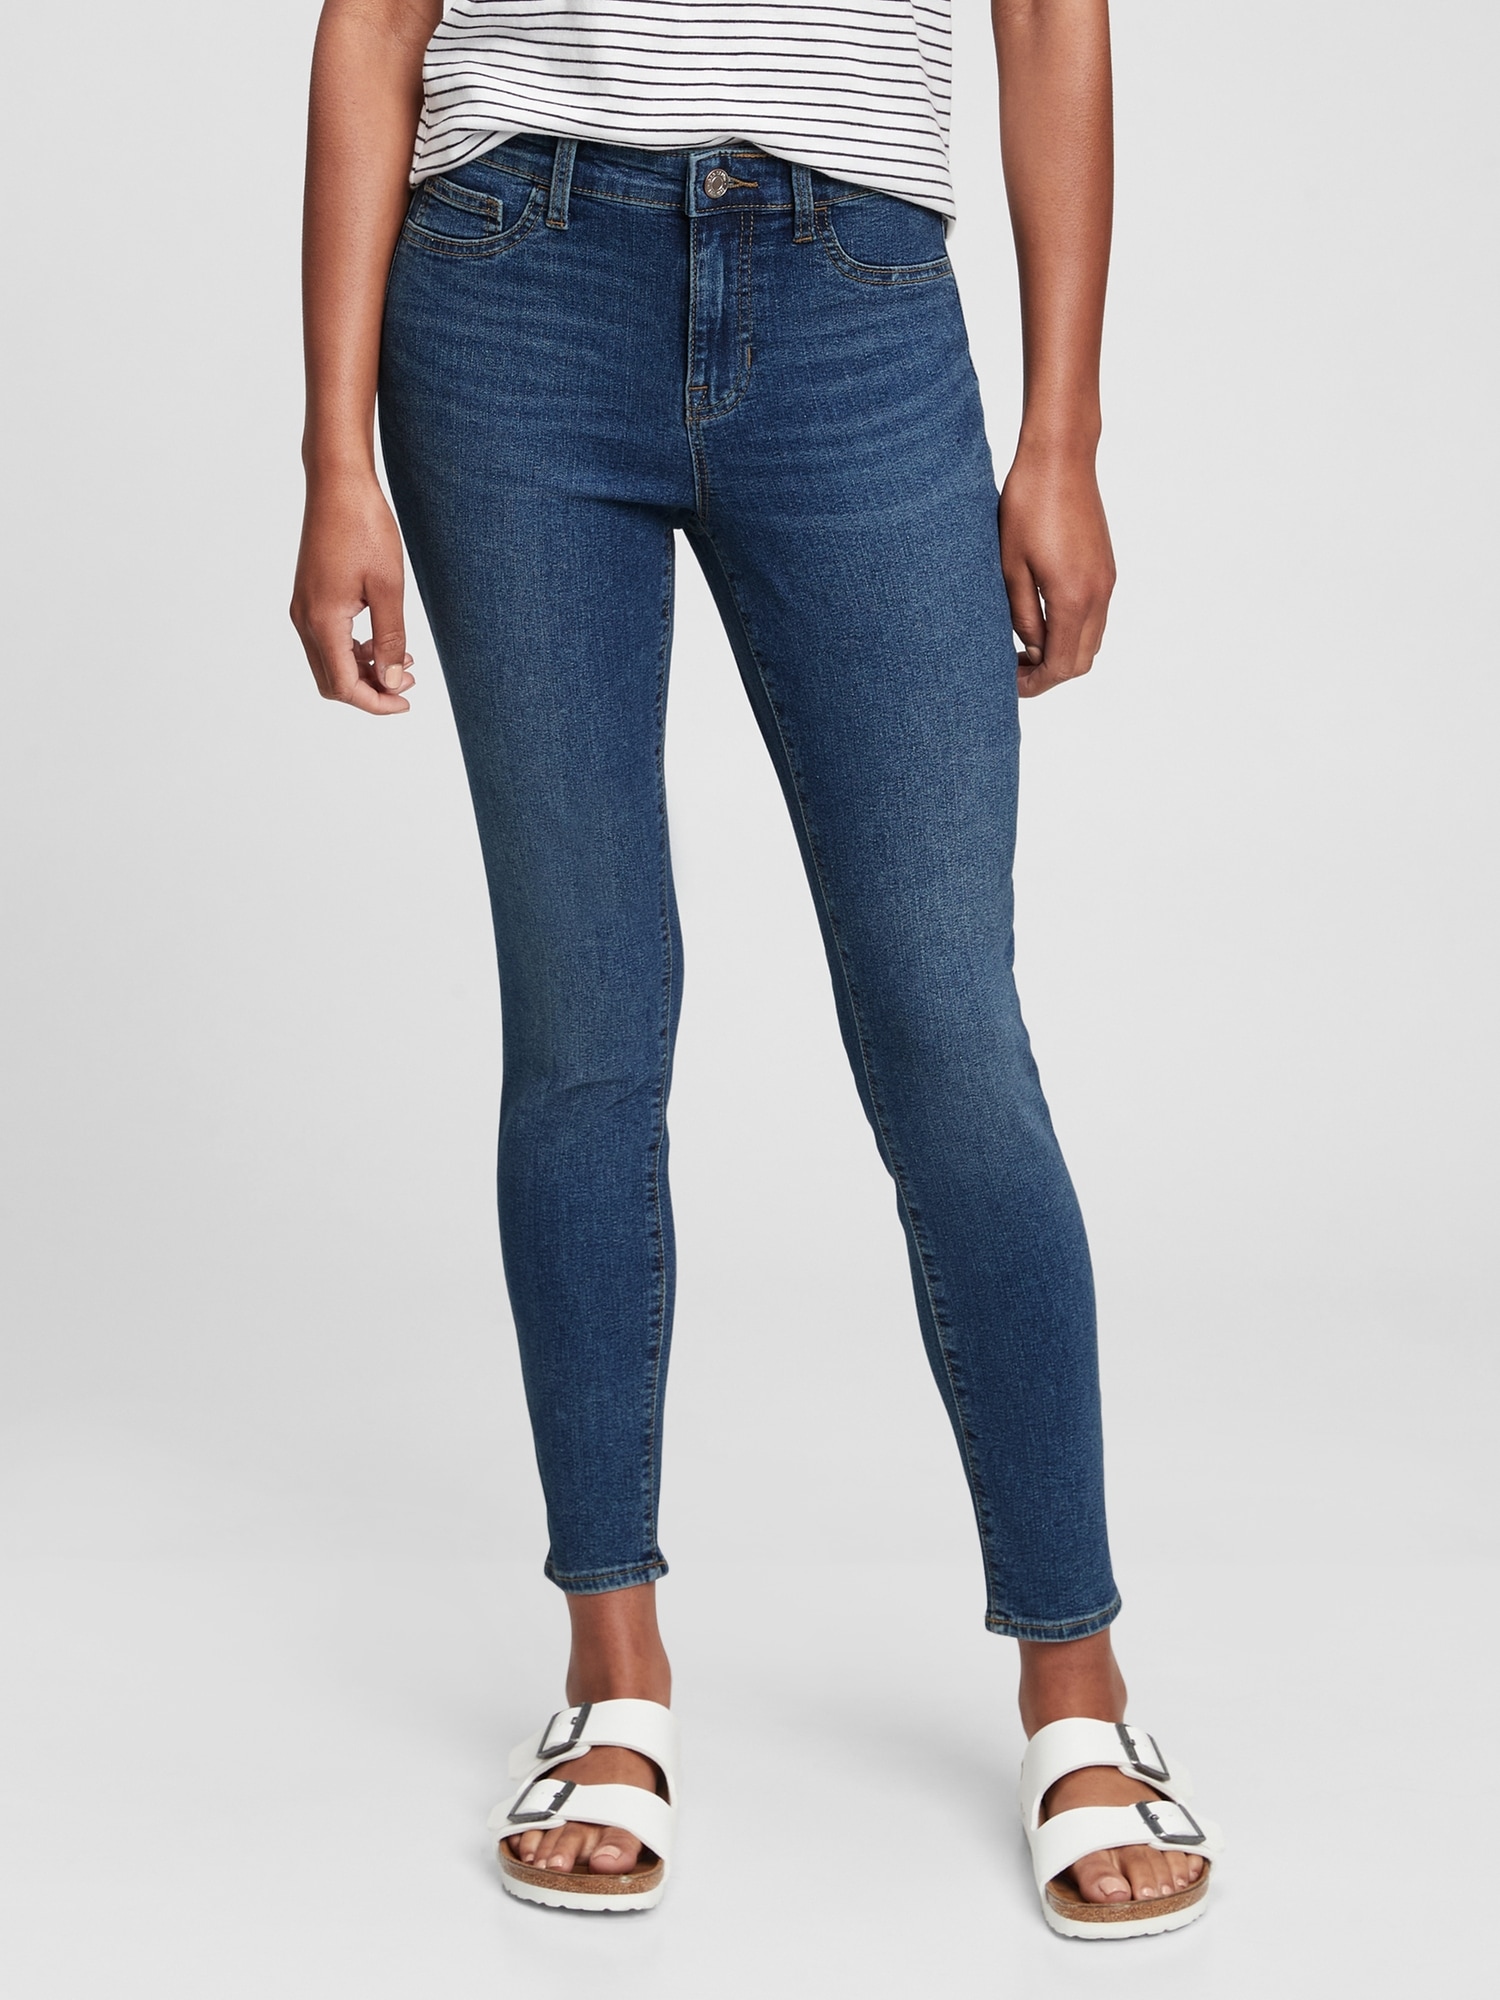 womens blue jean jeggings - OFF-54% >Free Delivery